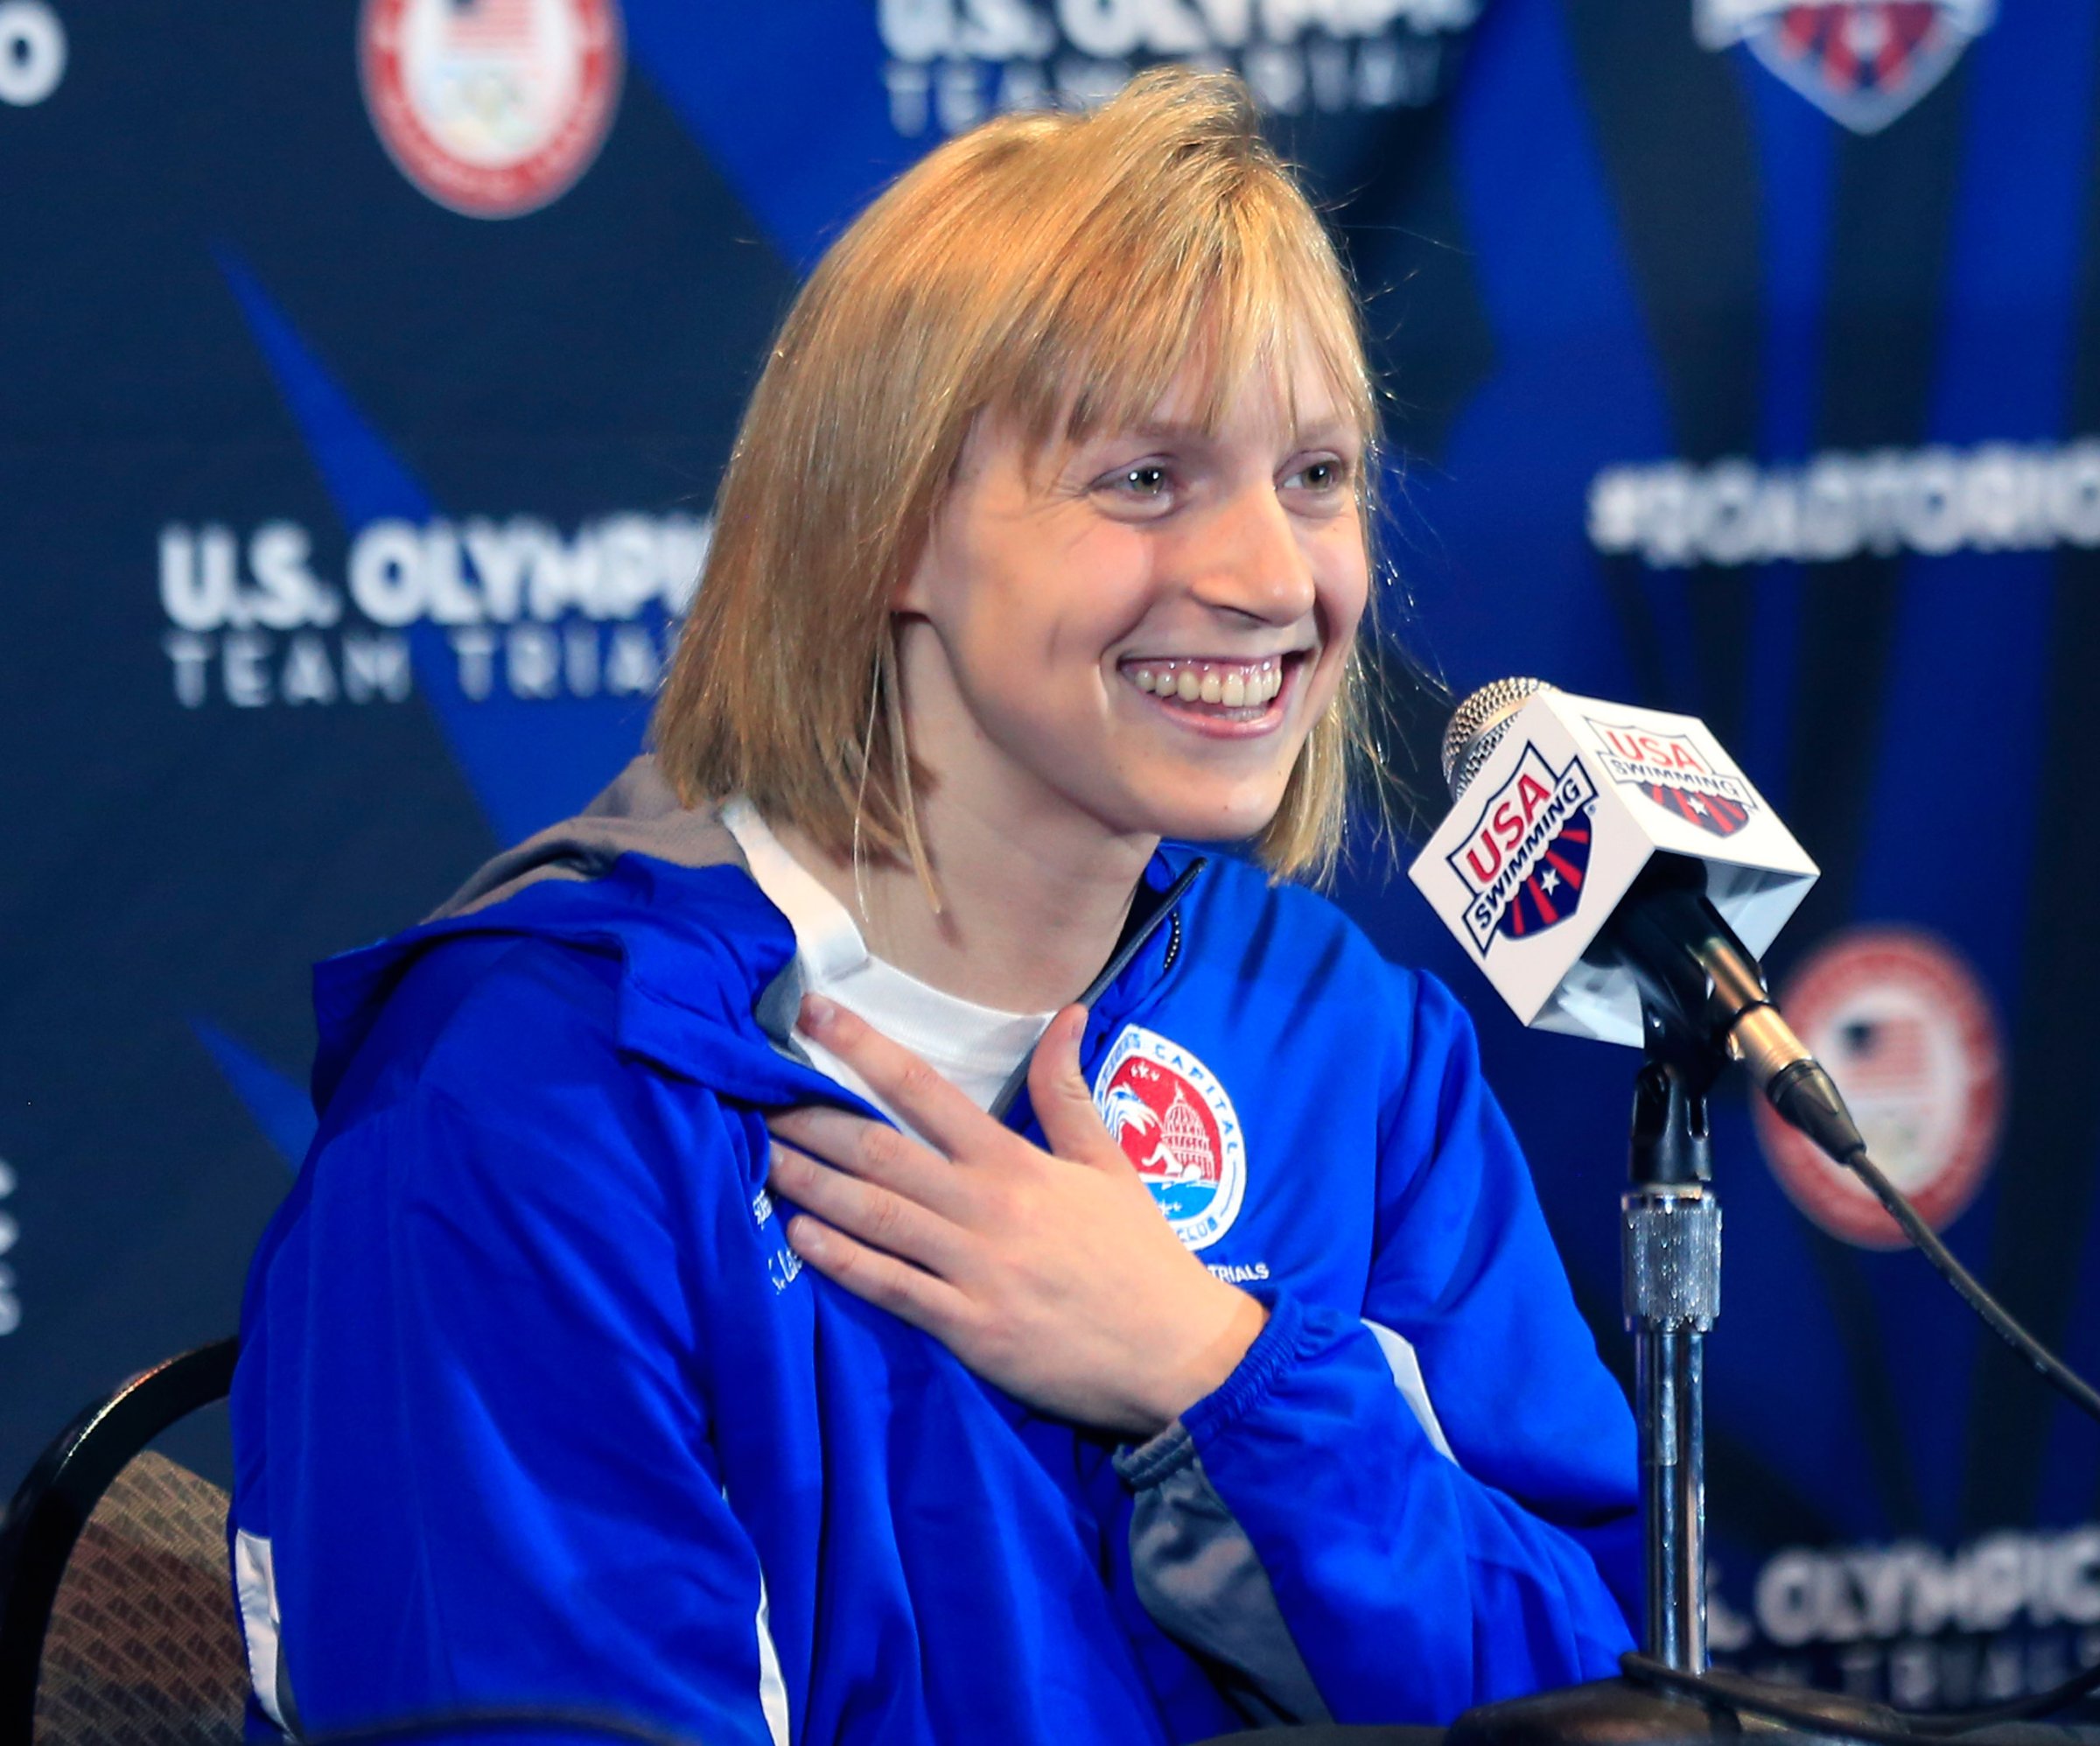 Olympic gold medalist Katie Ledecky speaks during a news conference at U.S. Olympic team trials in Omaha, Neb., Friday, June 24, 2016. (AP Photo/Orlin Wagner)